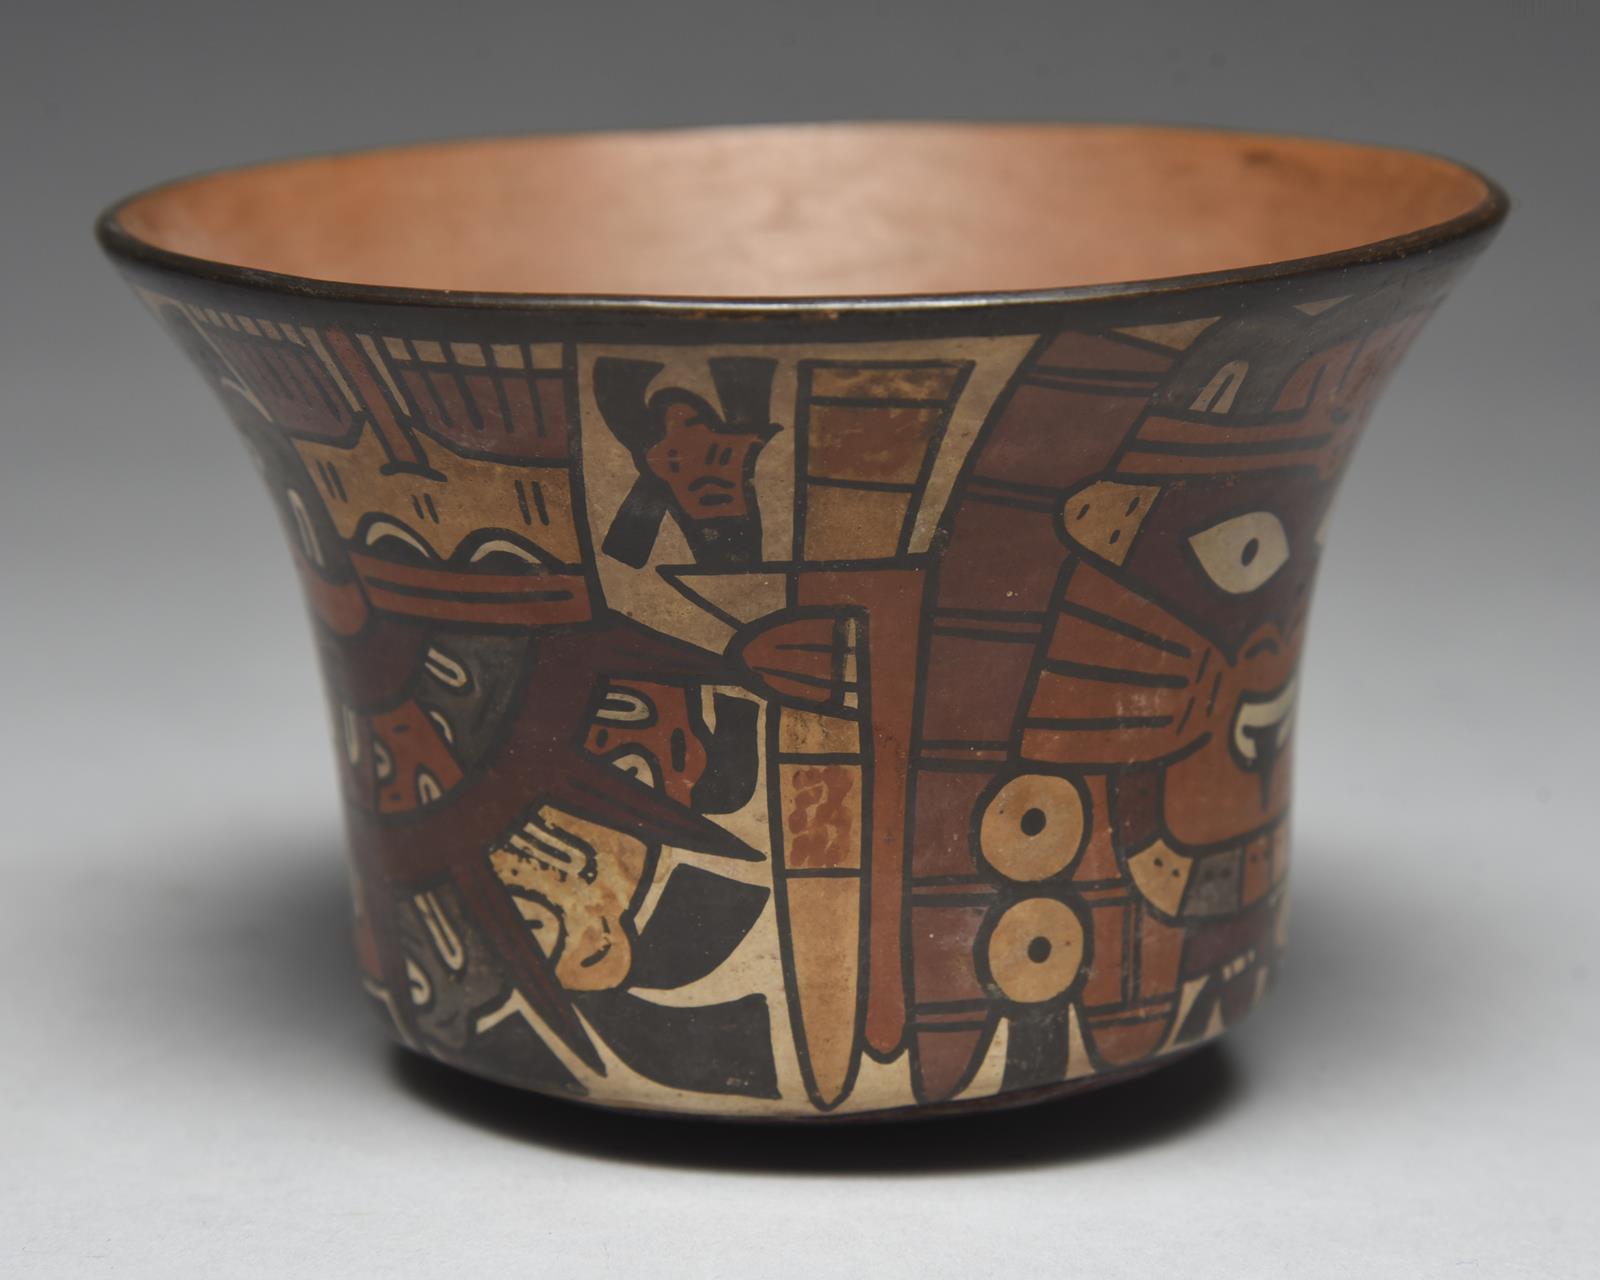 A Nazca bowl Peru, circa 200 - 600 AD pottery, painted a mythical flying being with trophy heads - Image 5 of 5